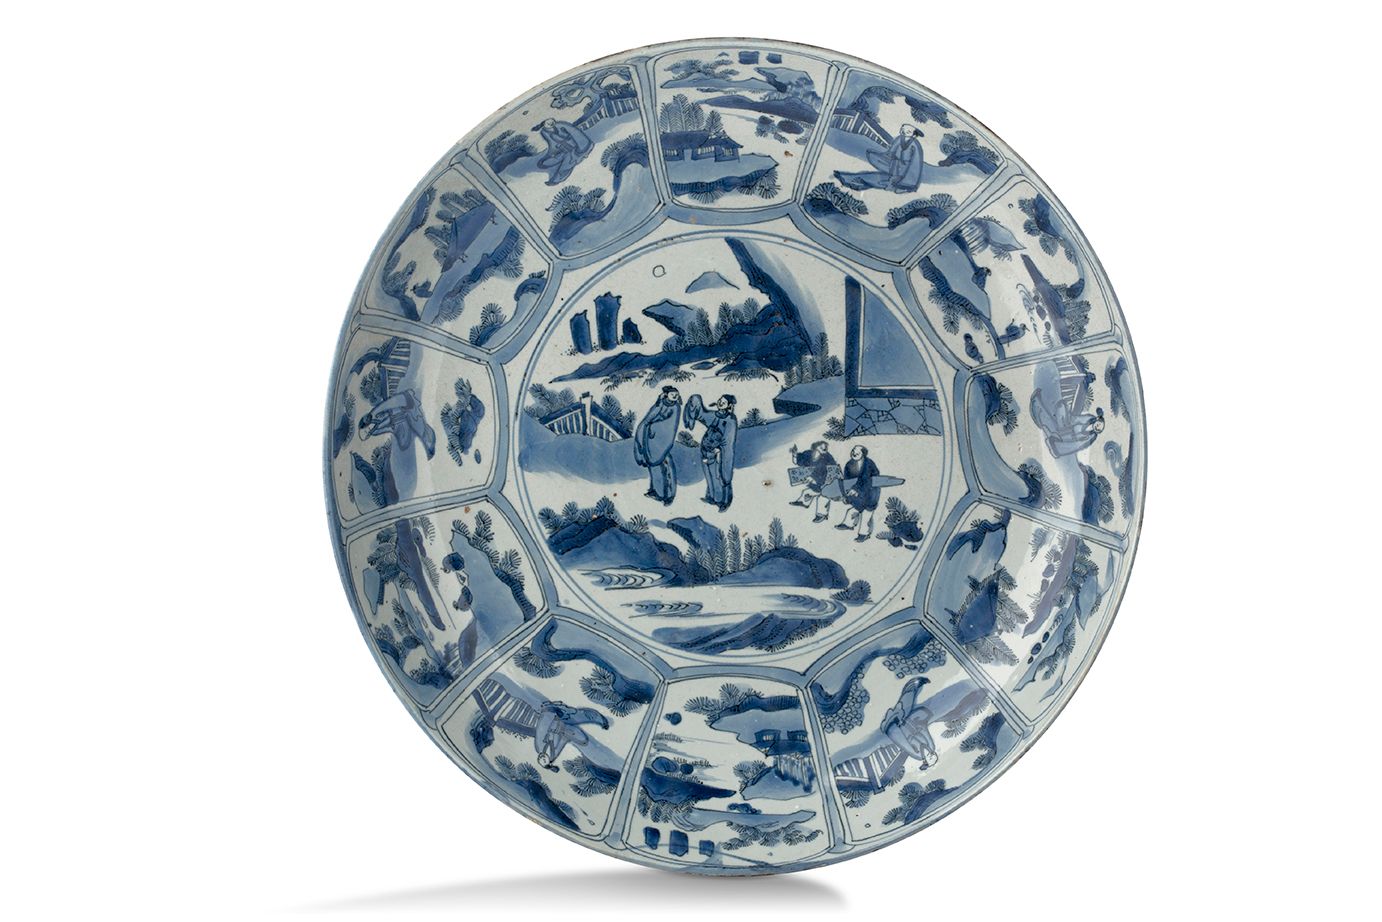 CHINE DYNASTIE MING, ÉPOQUE TIANQI-CHONGZHEN (1620-1644) Large dish
In blue-whit&hellip;